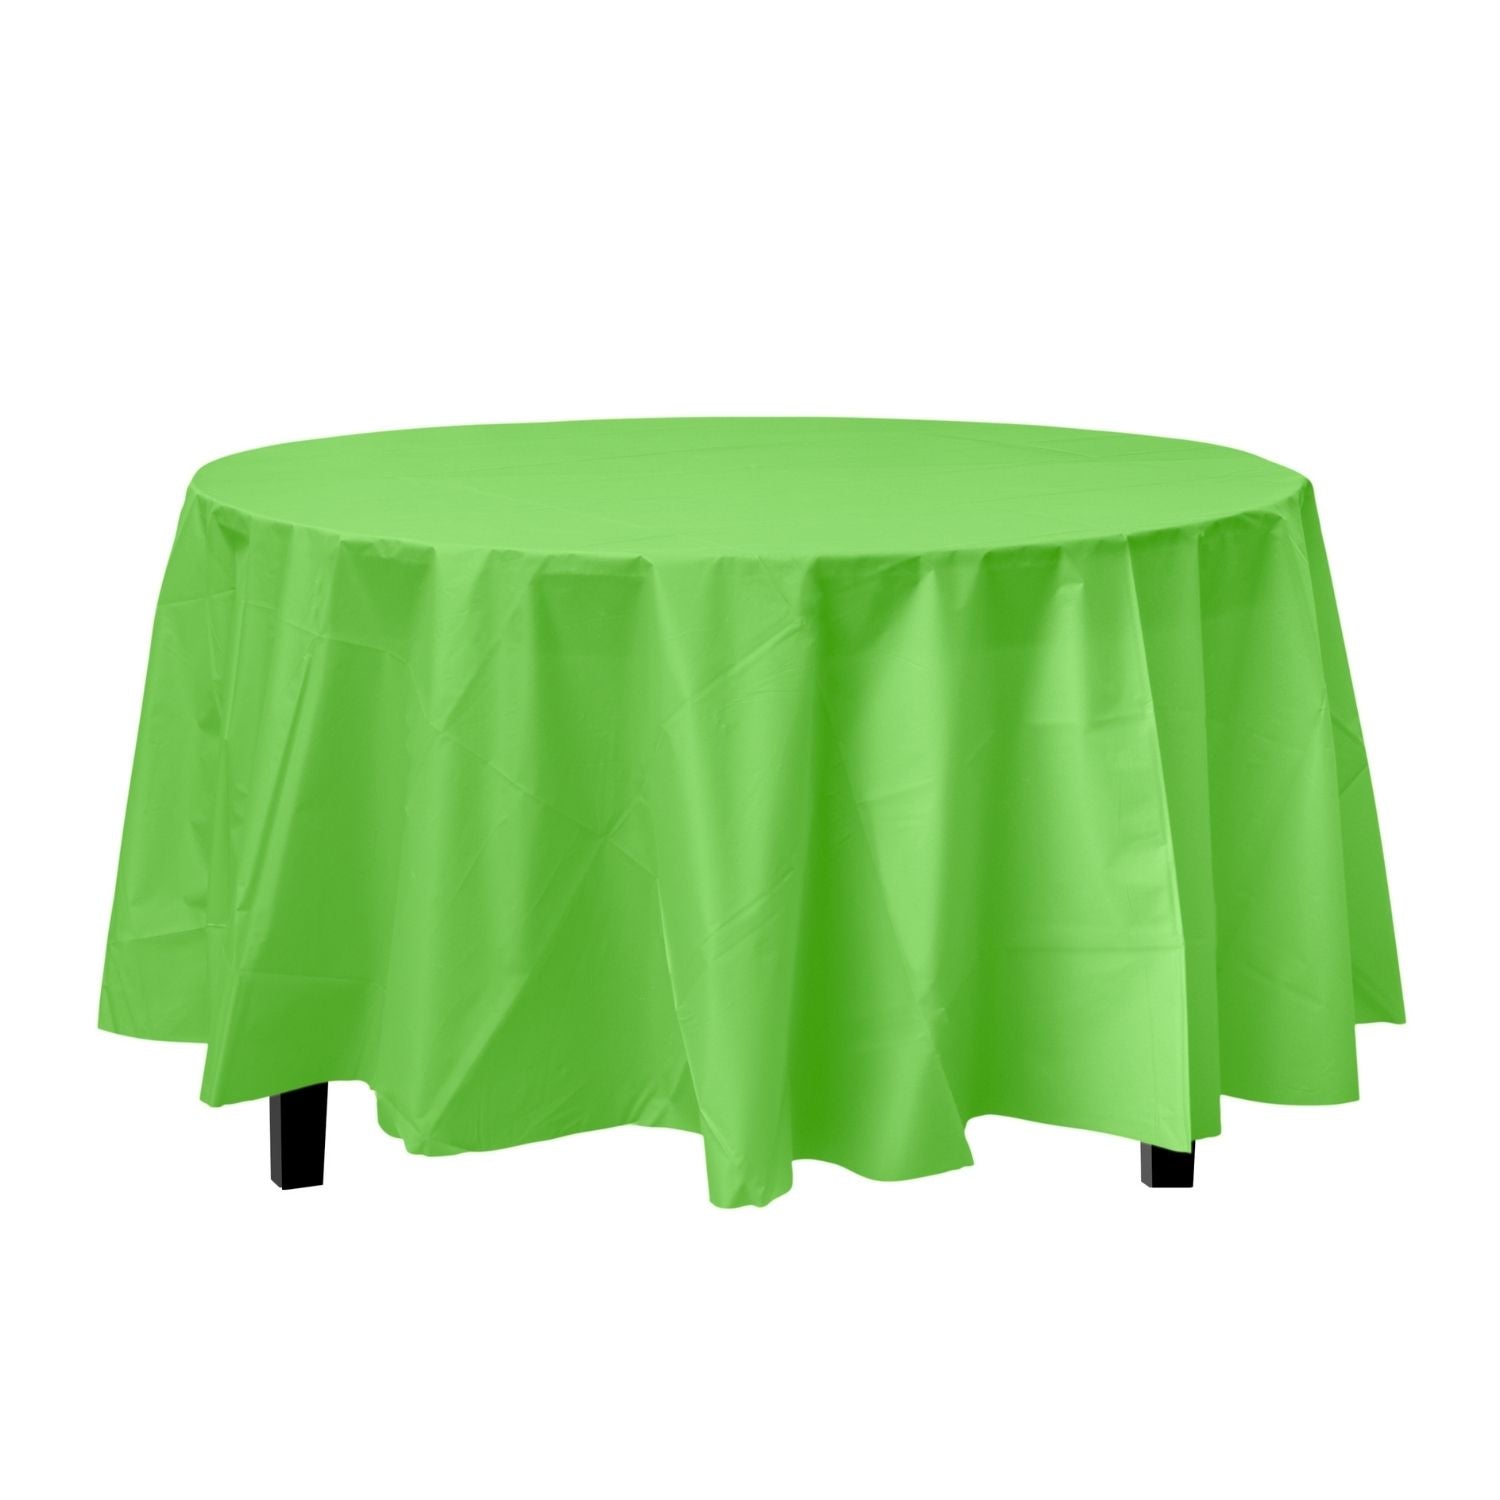 Lime Green Round Plastic Tablecloth | 48 Count - Yom Tov Settings